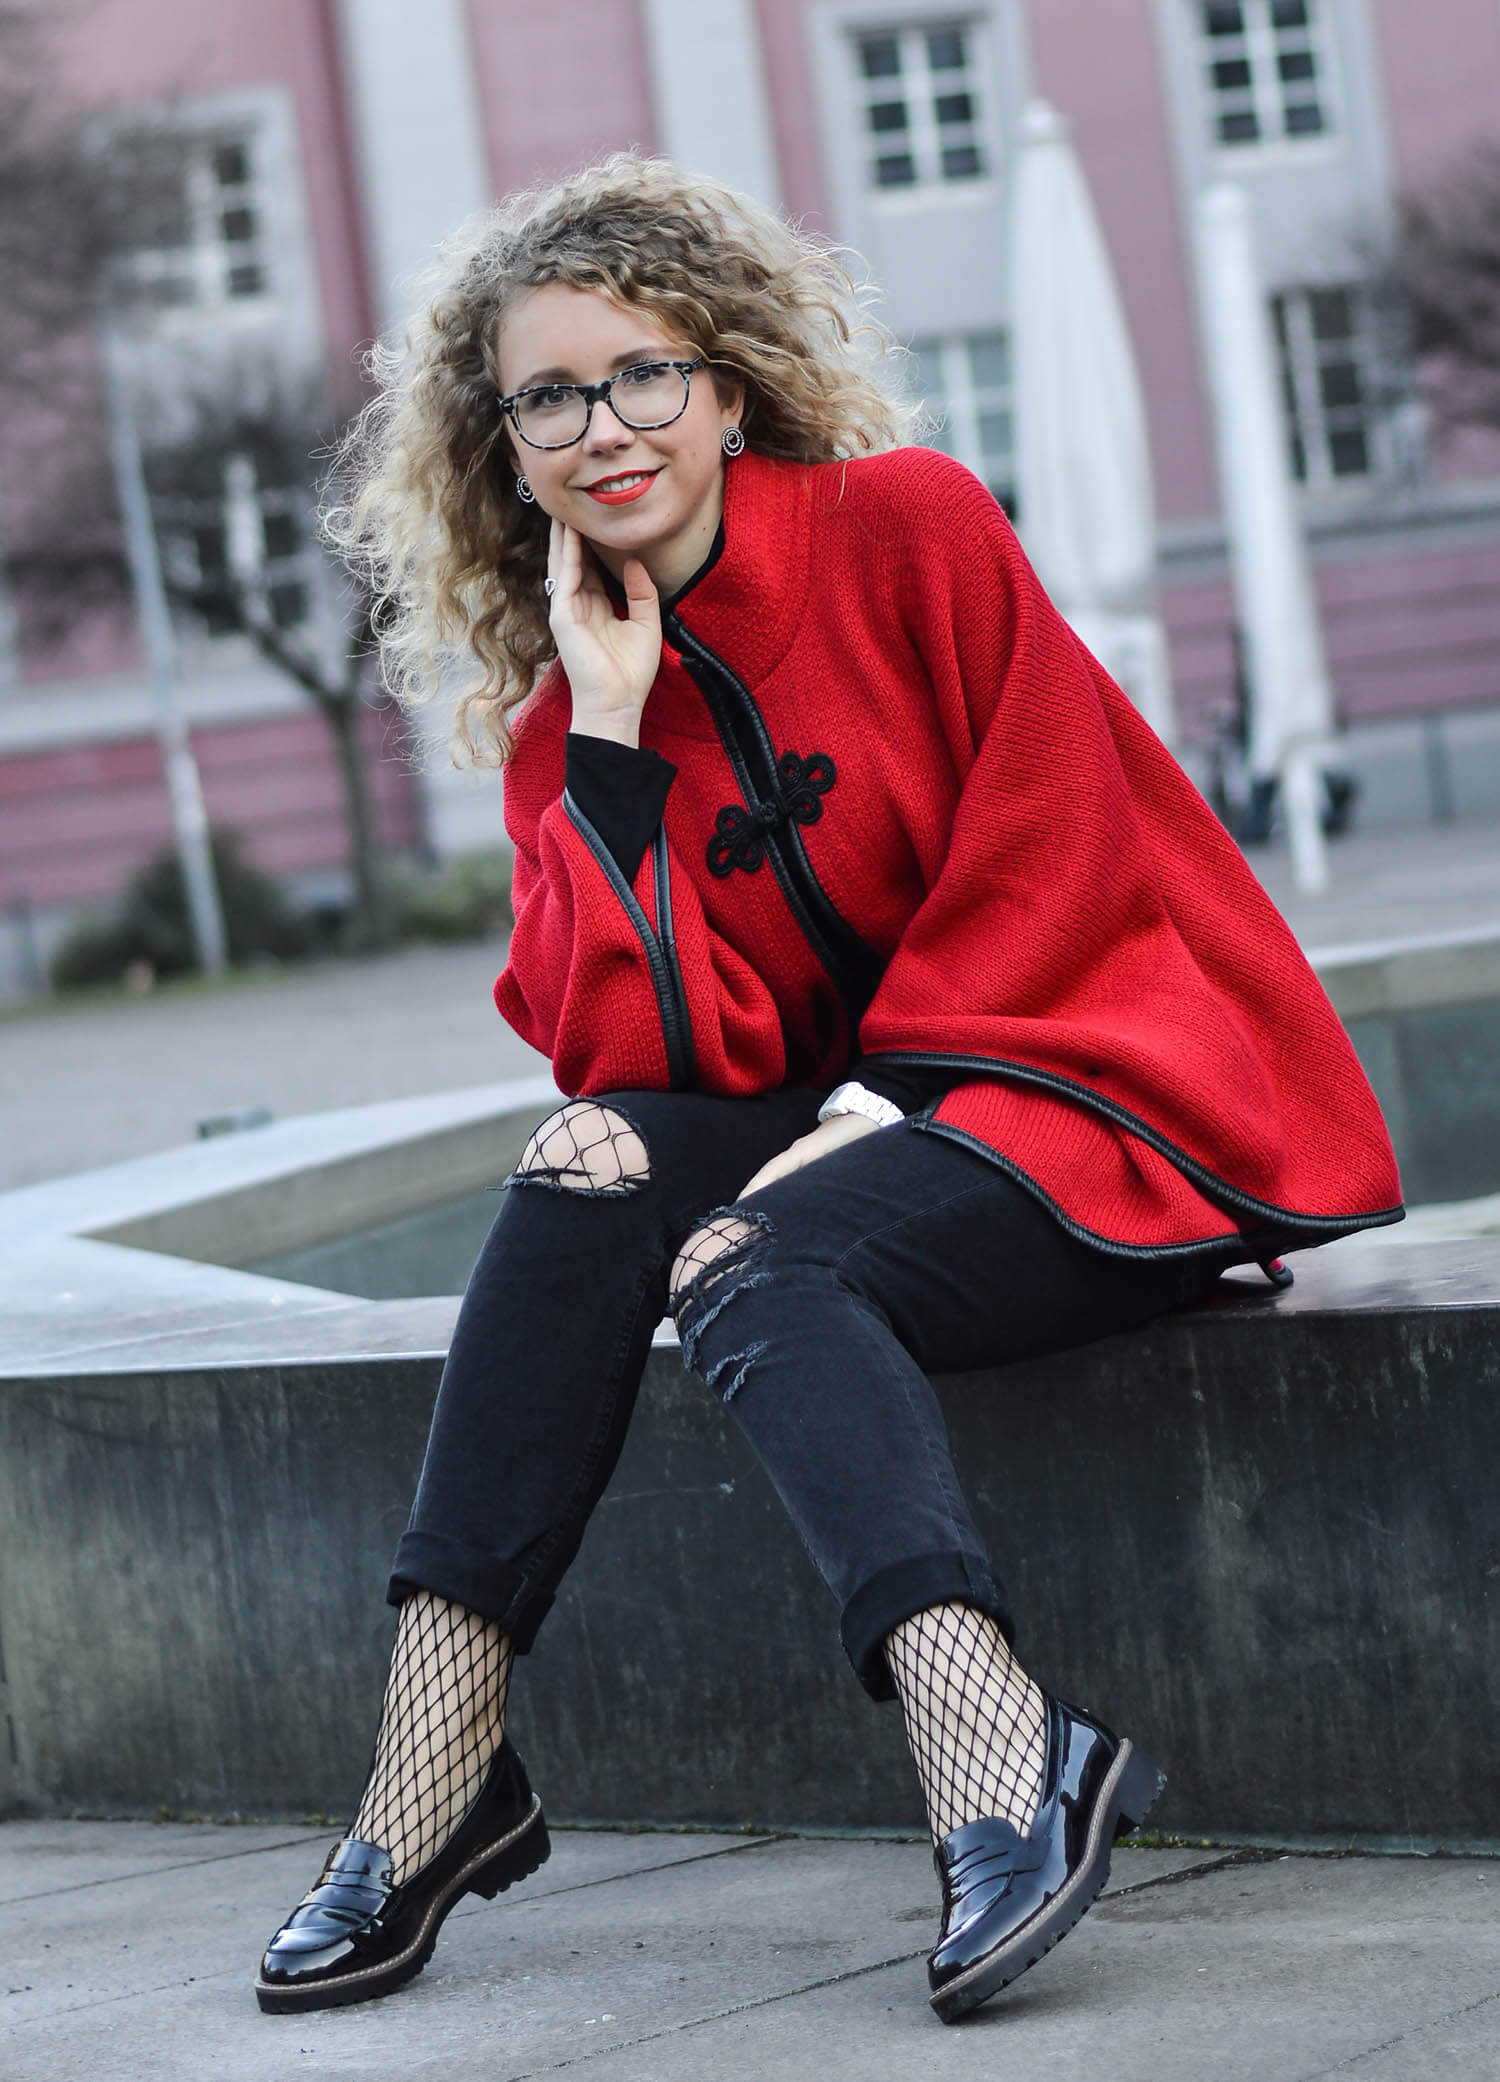 Kationette-Fashionblog-Germany-Streetstyle-Outfit-RedRidingHood-Ripped-Jeans-Fishnet-curls